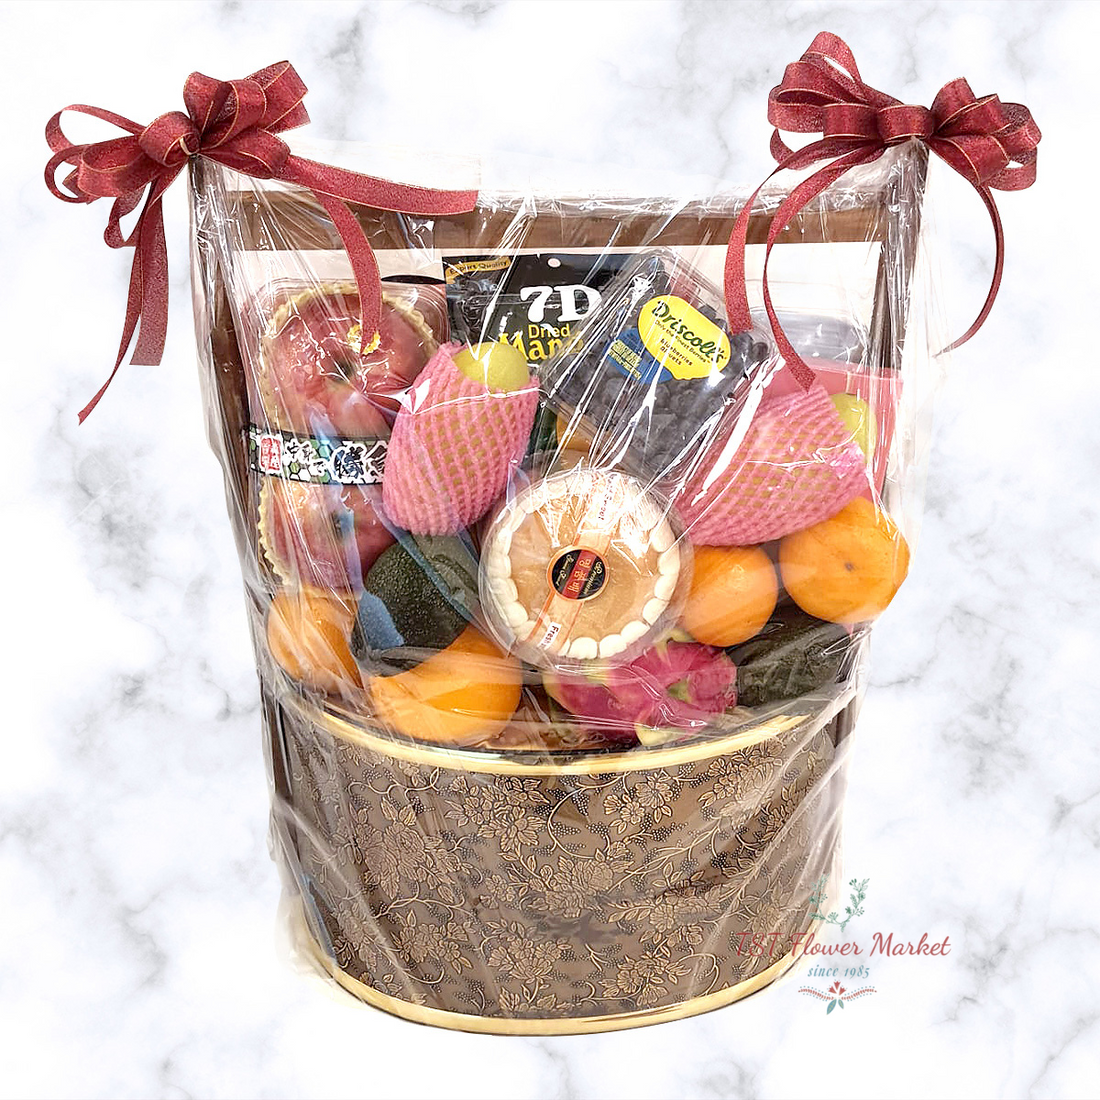 Mid Autumn Hamper 中秋節果籃A12-This hamper is packed with deluxe fruits imported overseas, from Japan, Korea, etc.-TST Flower Market